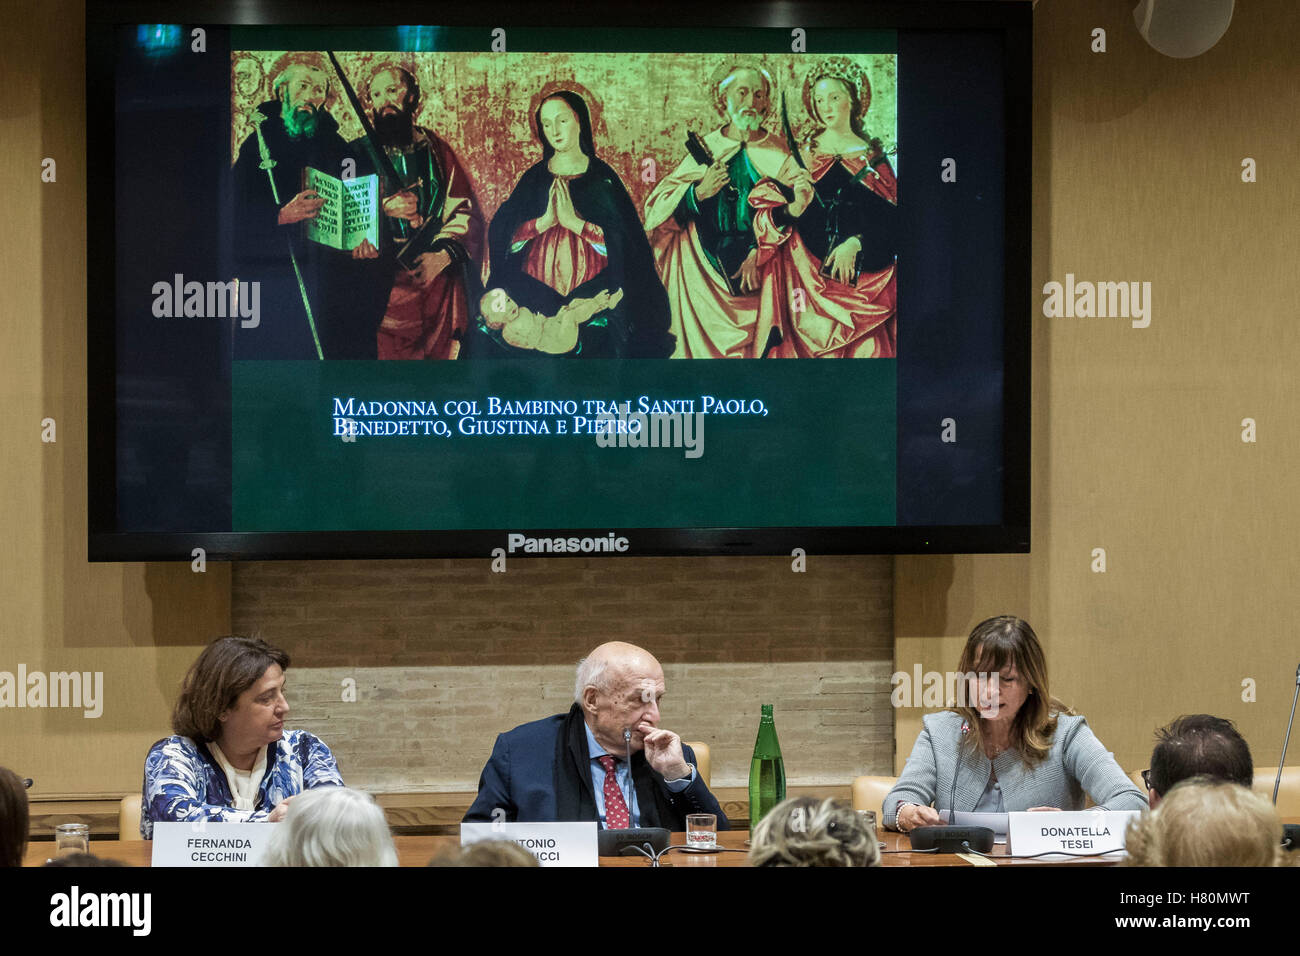 Rome, Italy. 08th Nov, 2016. Antonio Paolucci (Vatican Museums' Director) attends the 'Antoniazzo Romano' exhibition press conference at the Vatican Museums in Rome, Italy. Antoniazzo Romano, born Antonio di Benedetto Aquilo degli Aquili (c. 1430 – c. 1510) was an Italian Early Renaissance painter, the leading figure of the Roman school during the 15th century. © Giuseppe Ciccia/Pacific Press/Alamy Live News Stock Photo